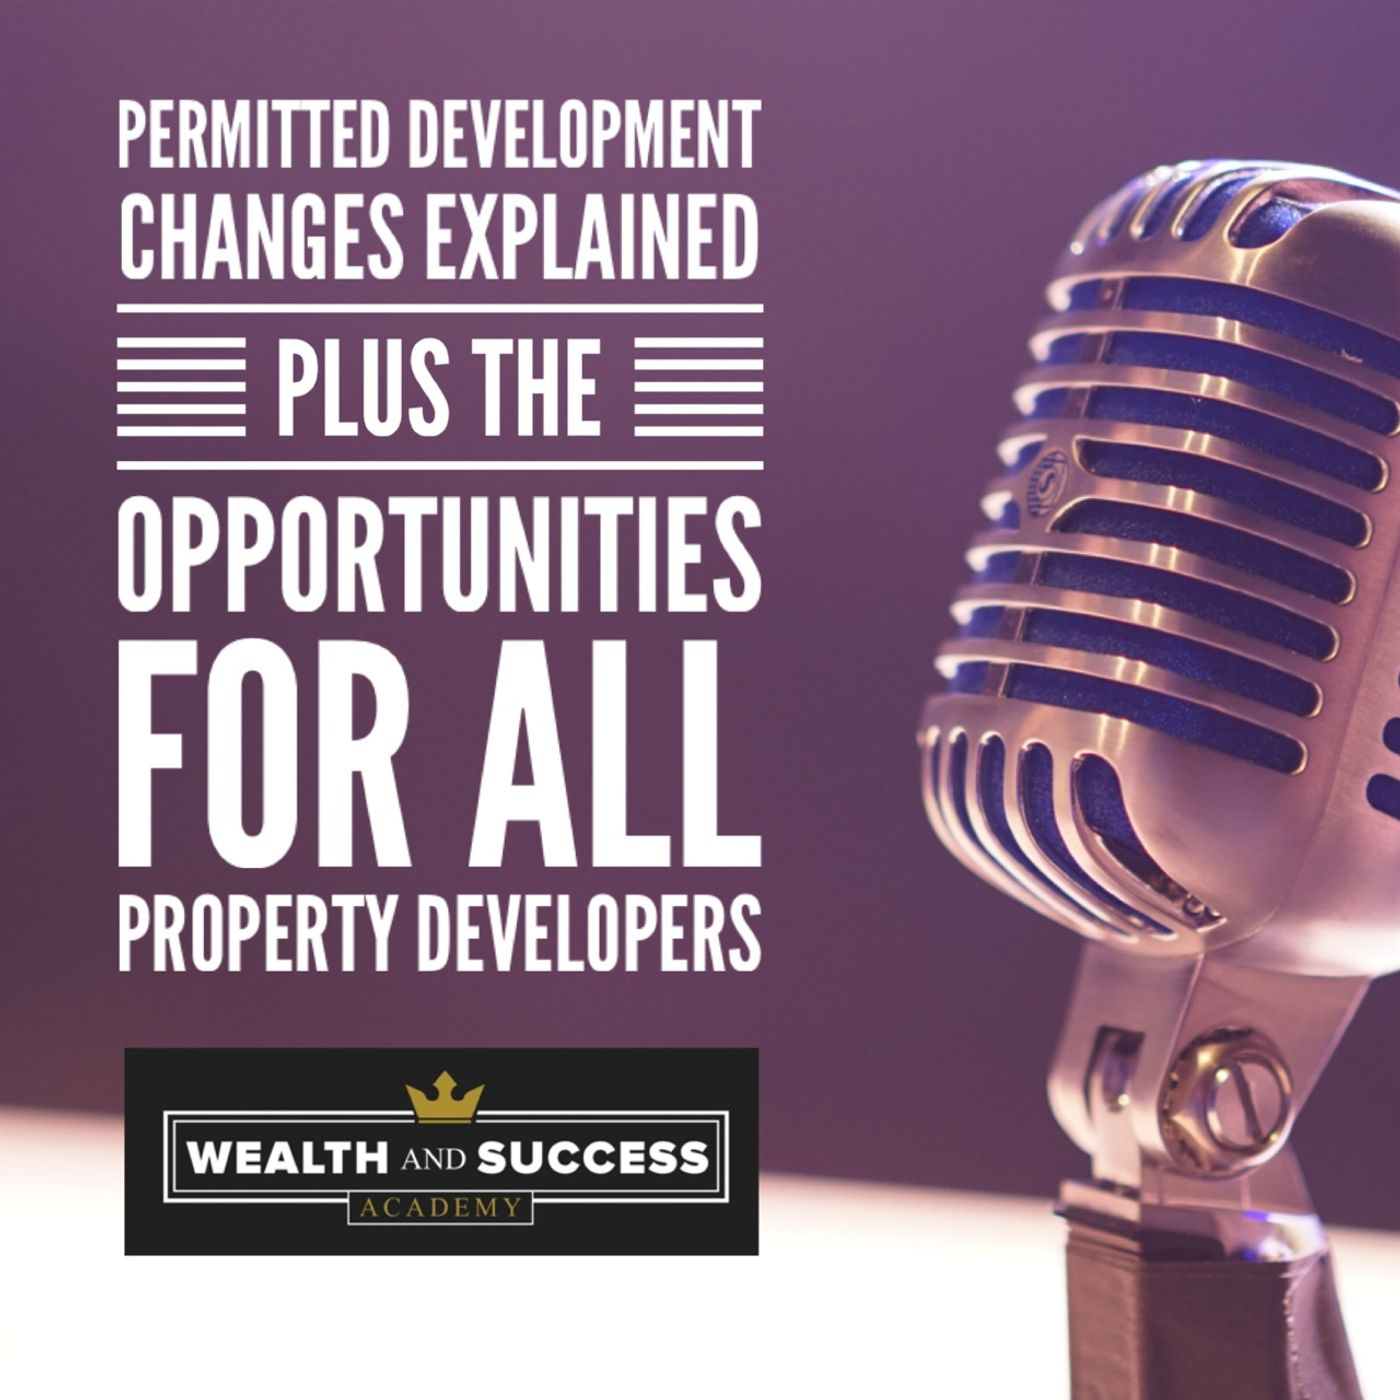 Permitted Development Changes Explained